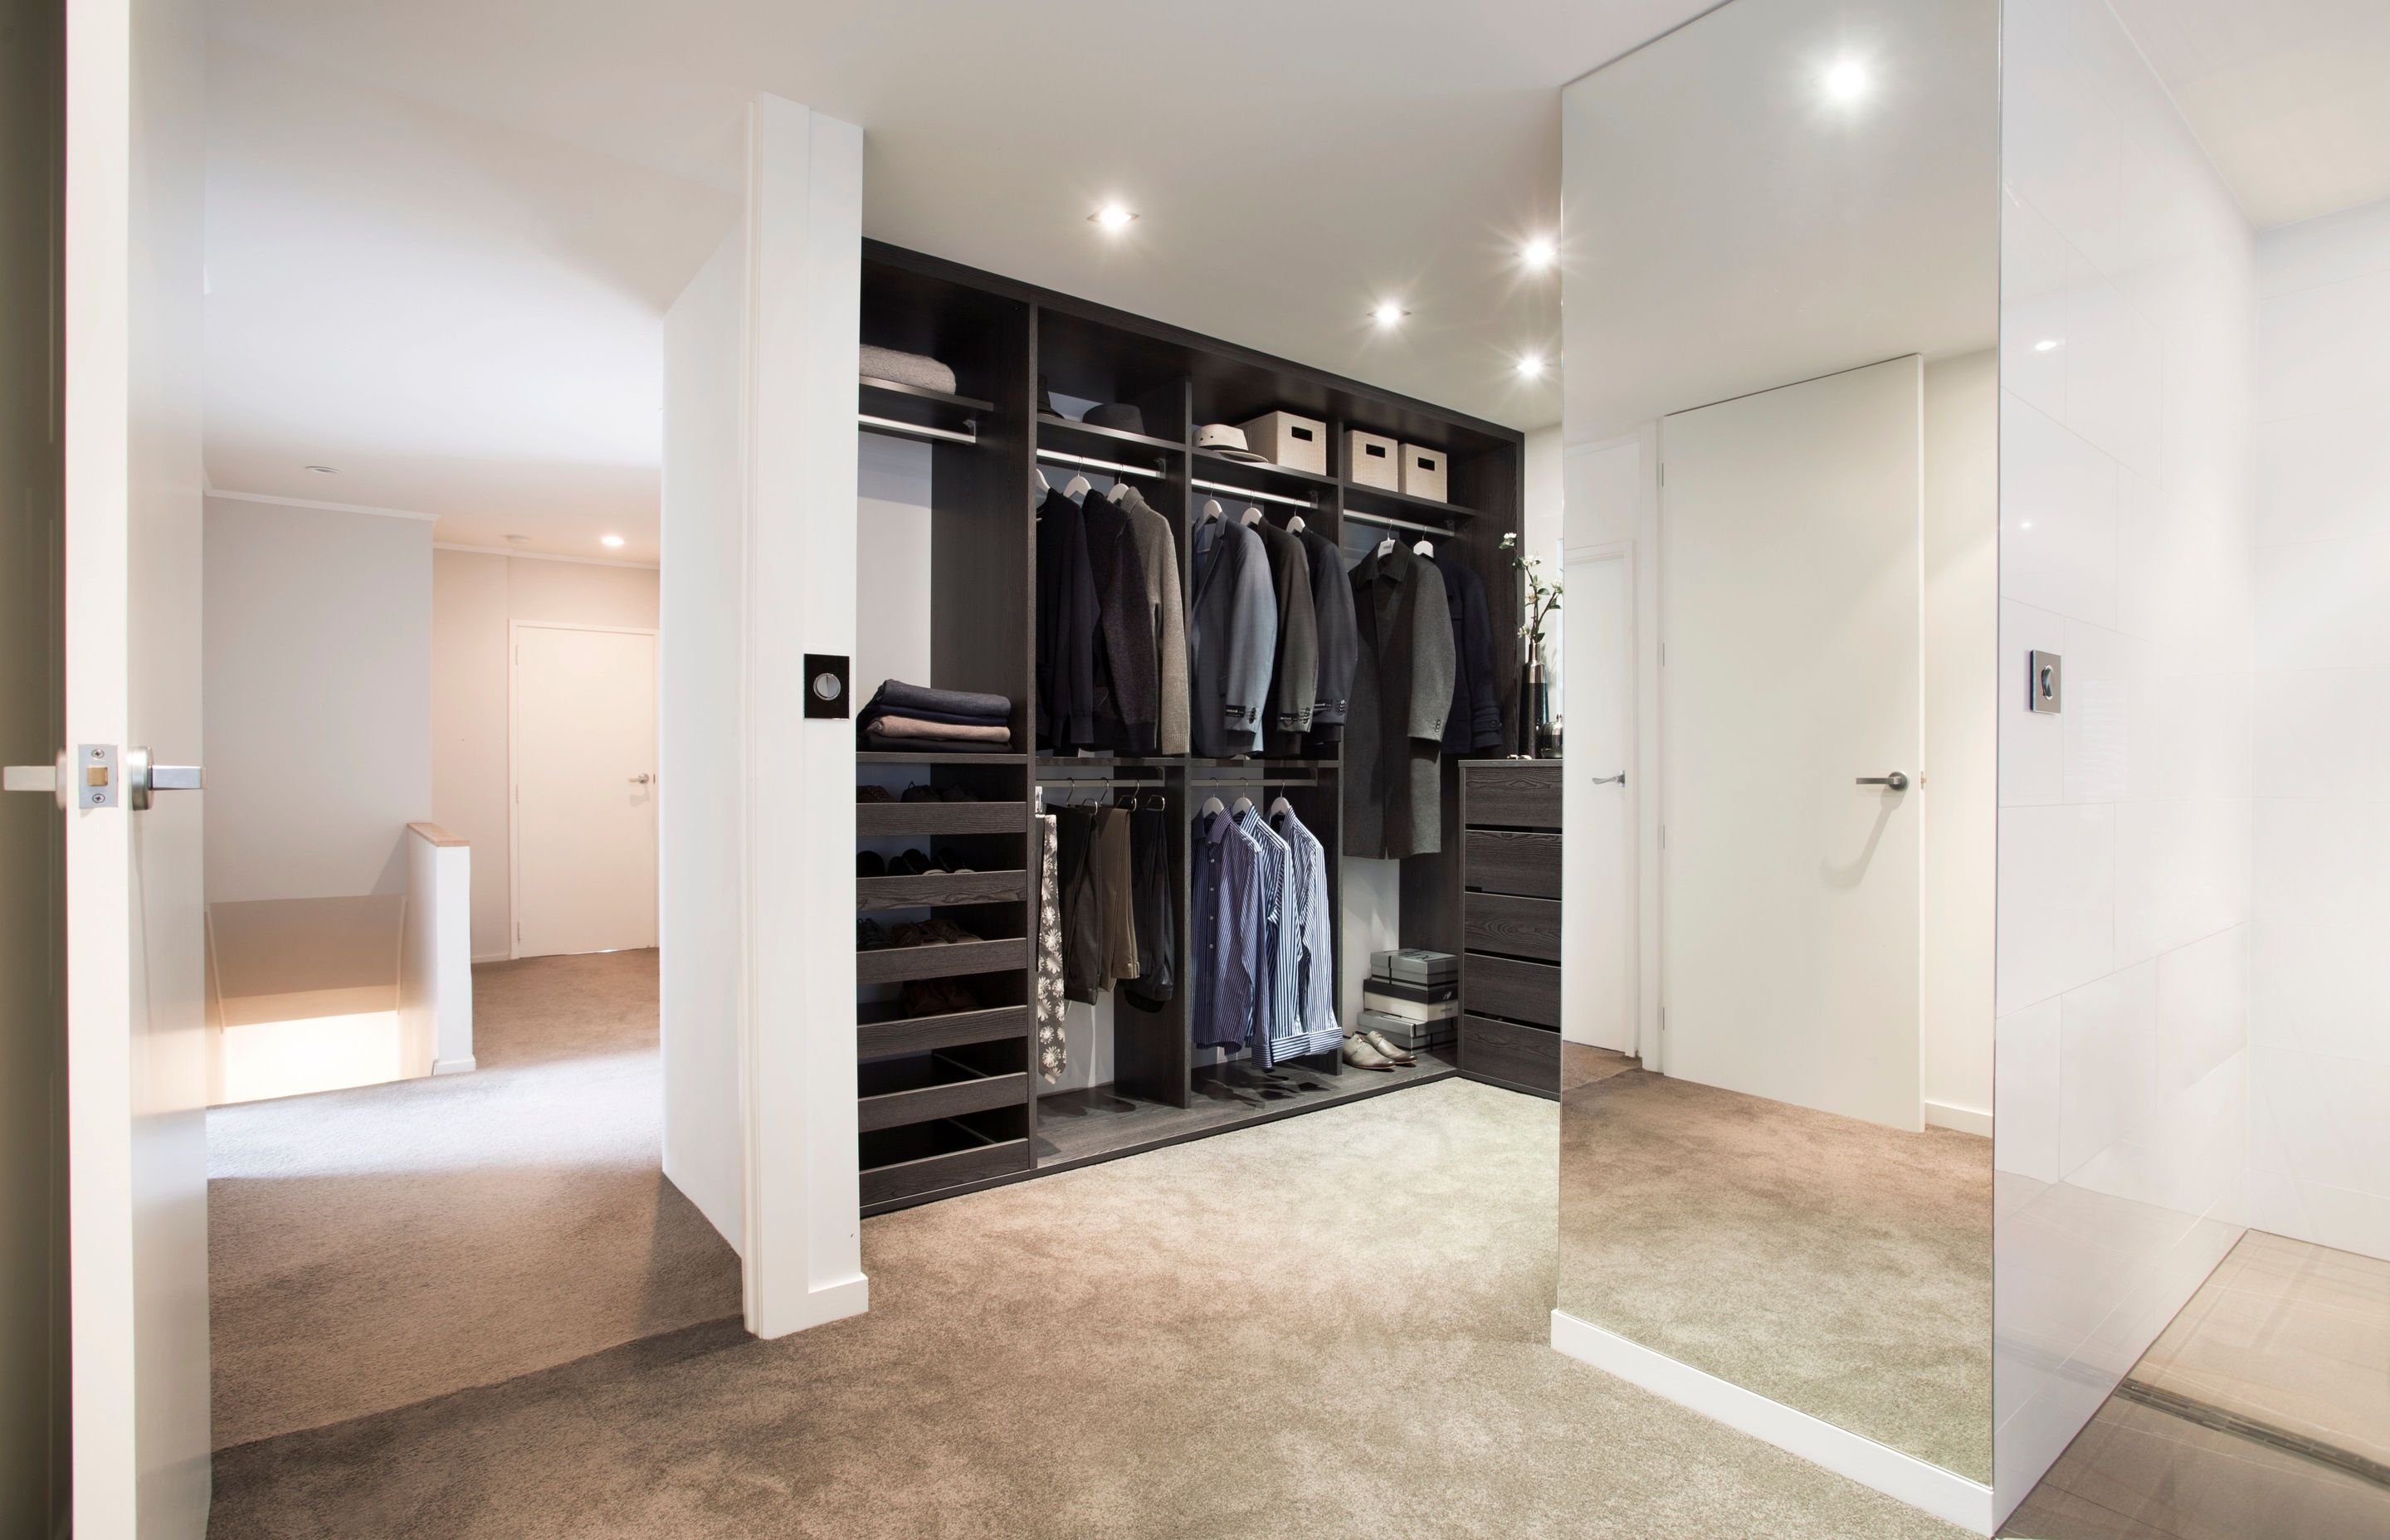 A place for everything and everything in it's place including coats, jackets, shirts, trousers, sweaters and shoes.